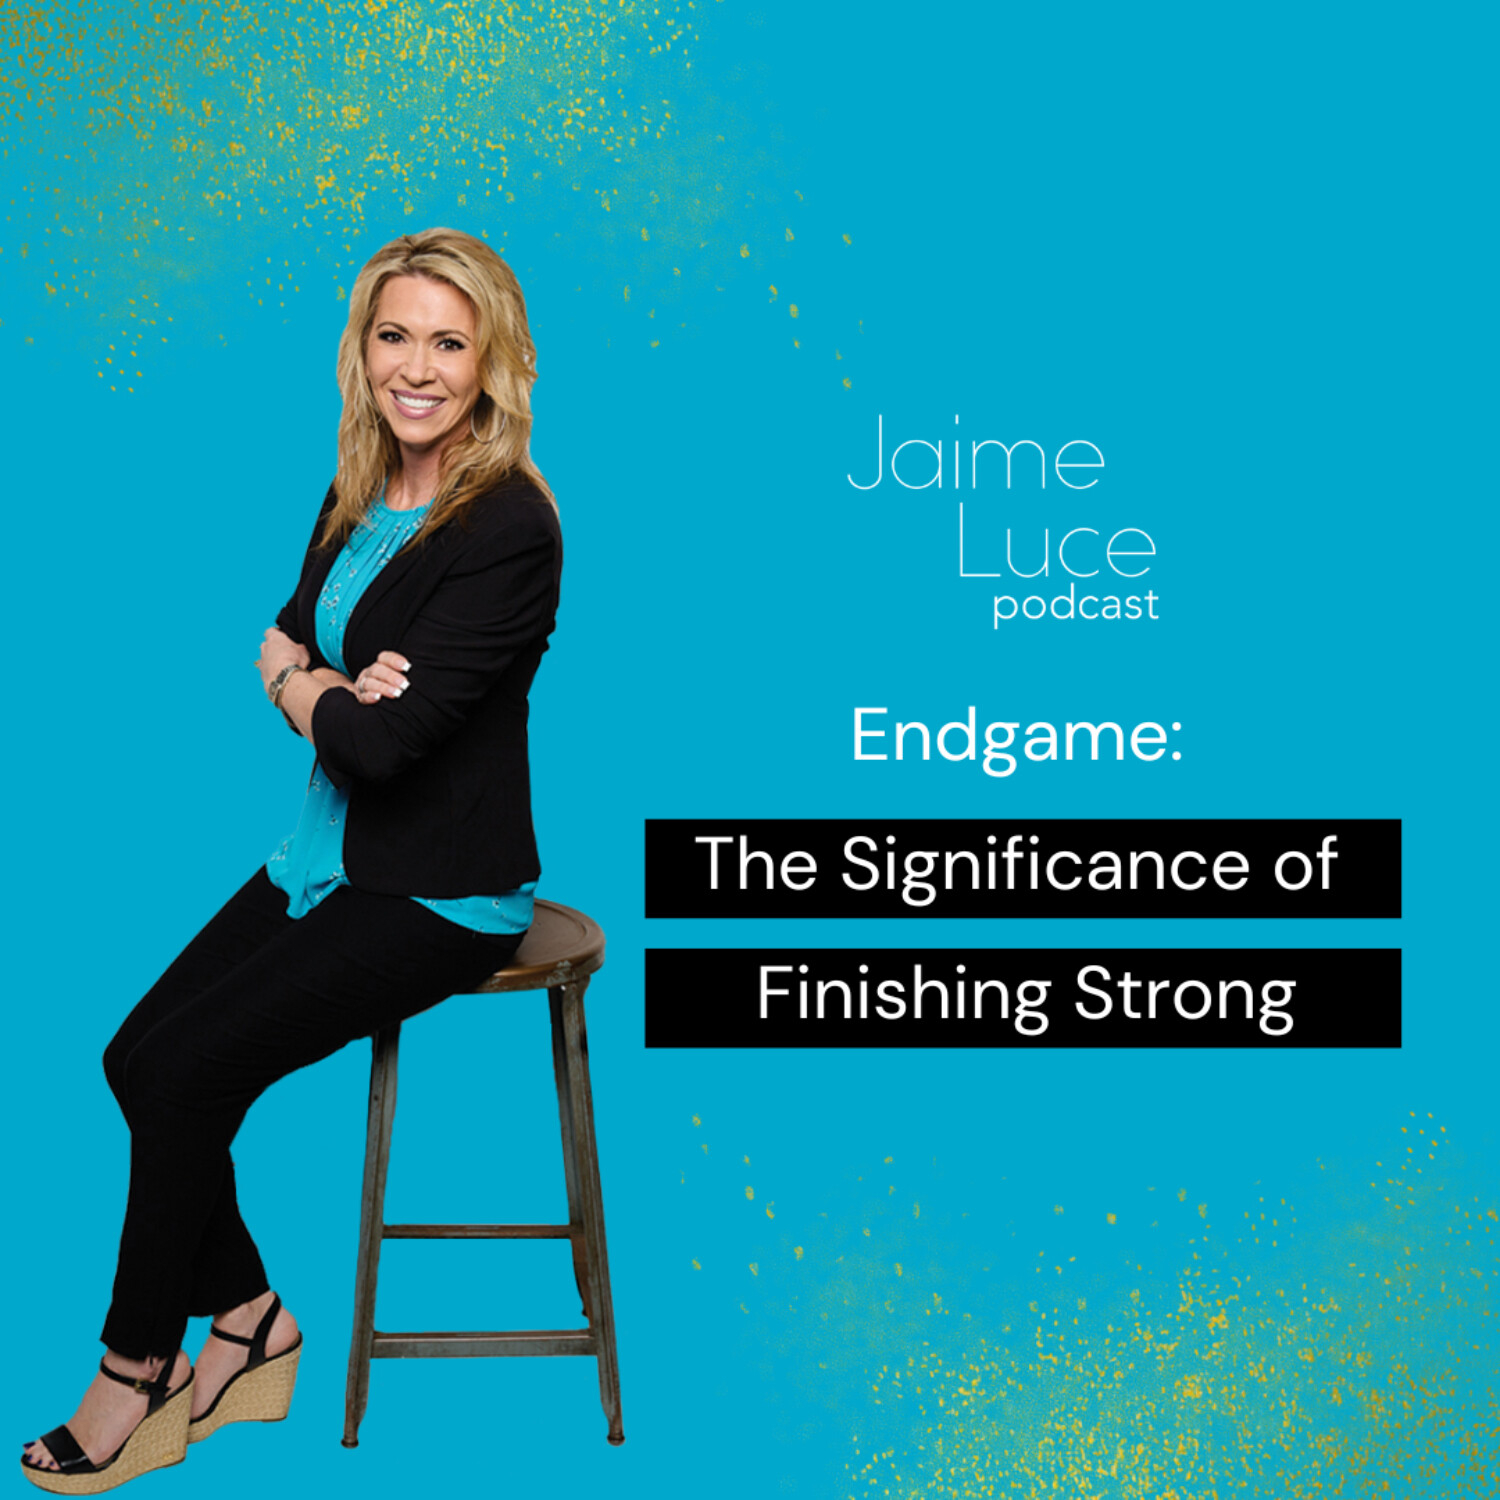 Endgame: The Significance of Finishing Strong